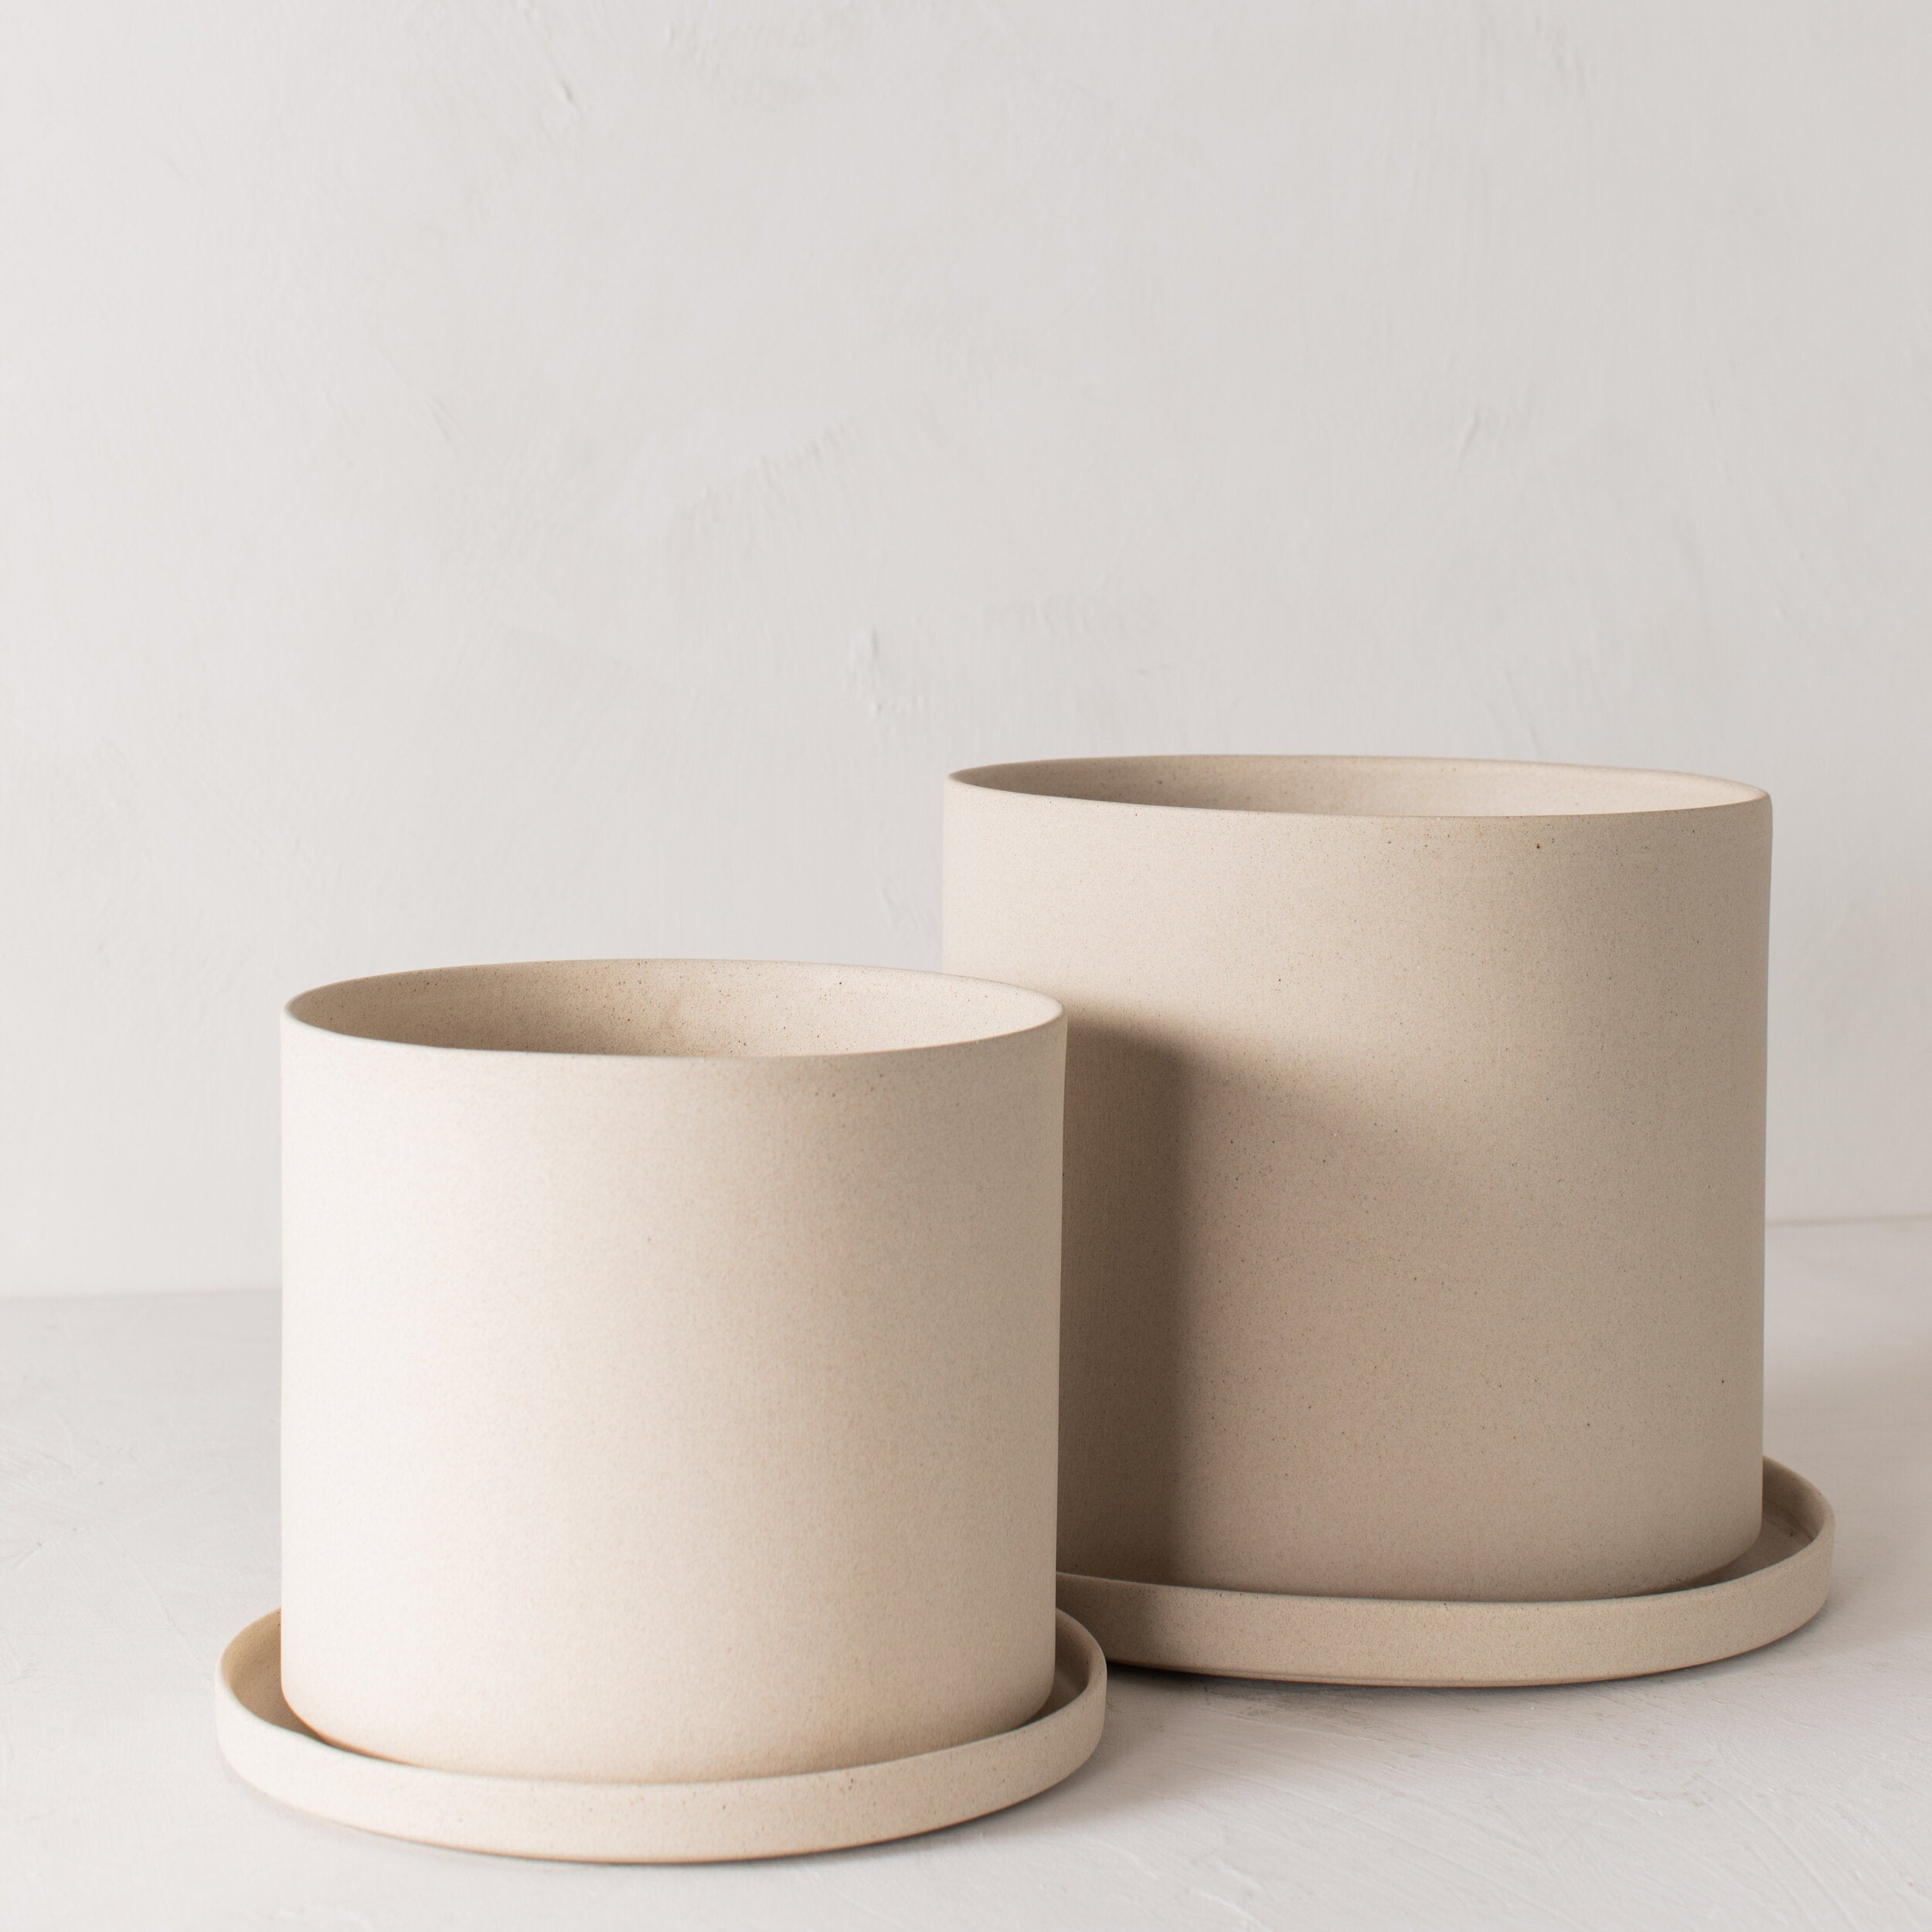 Two stoneware 10 inch ceramic planters with bottom drainage dish. Staged on a white plaster textured tabletop against a plaster textured white wall. Designed and sold by Convivial Production, Kansas City Ceramics. 